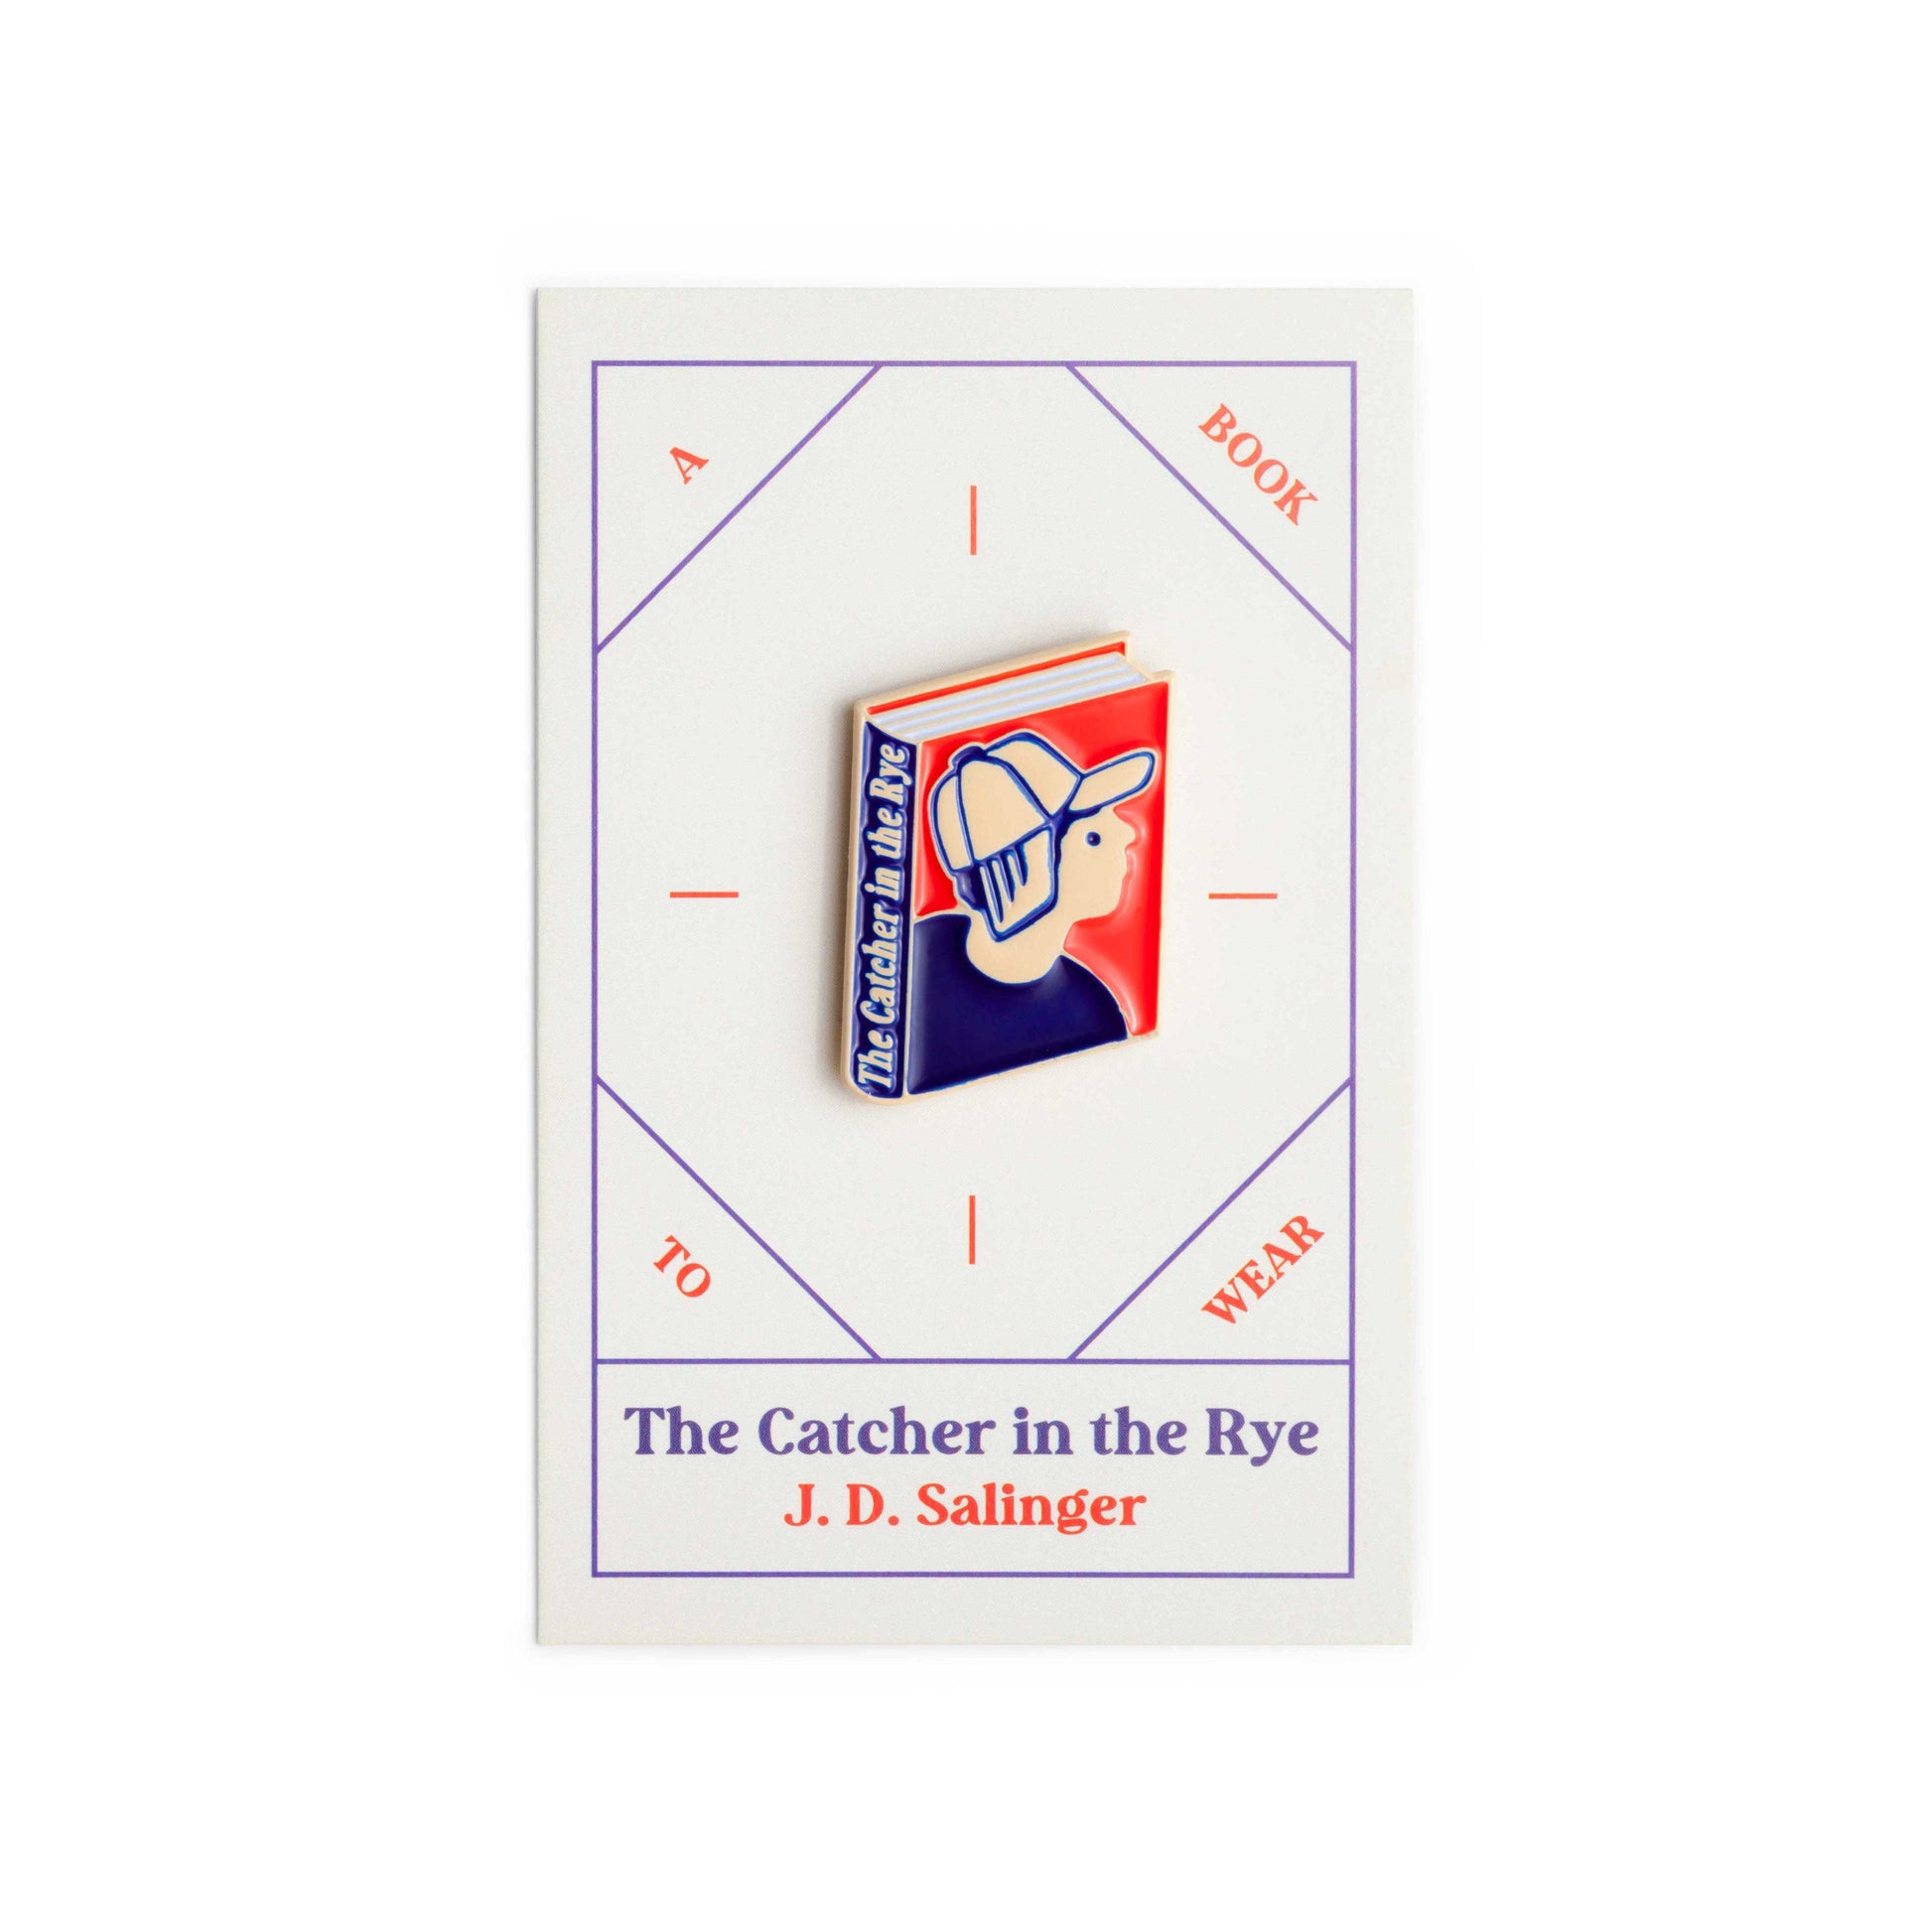 Collecting The Catcher in the Rye - The Great Republic